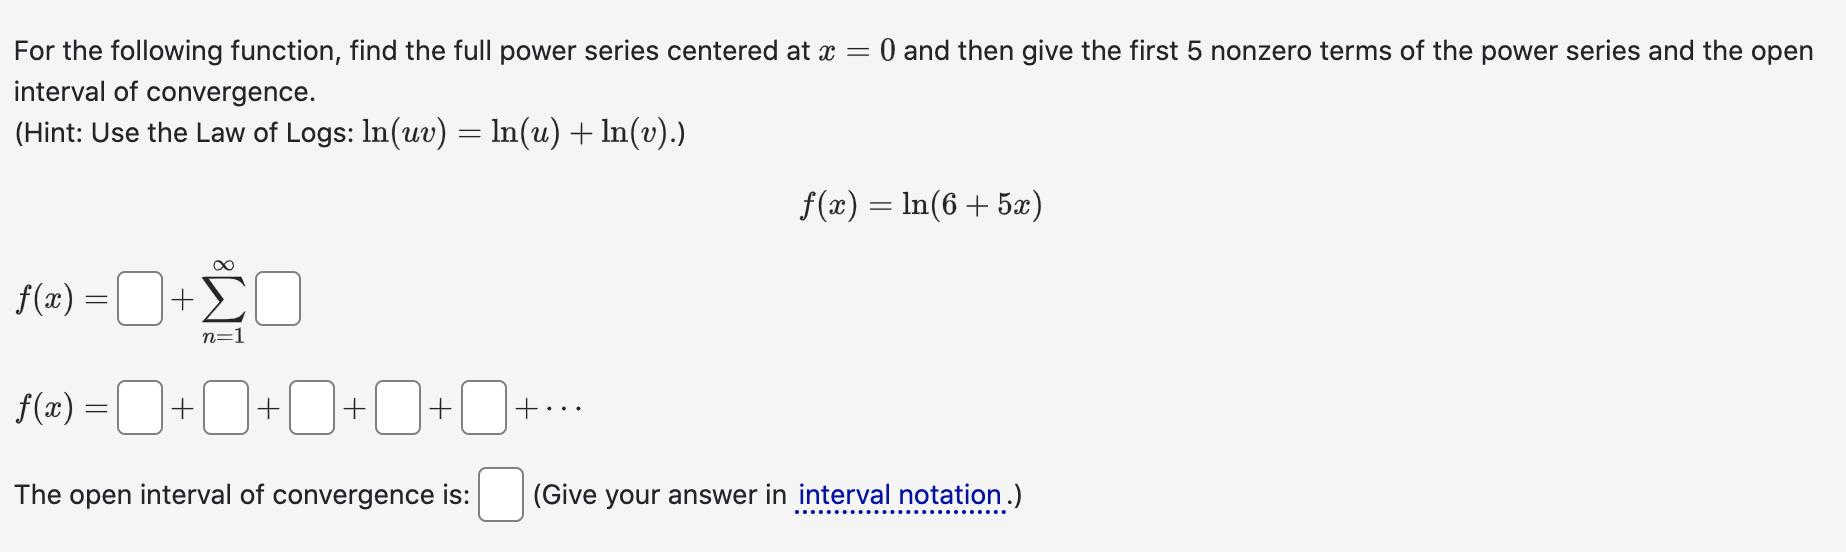 For the following function, find the full power series centered at x = 0 and then give the first 5 nonzero